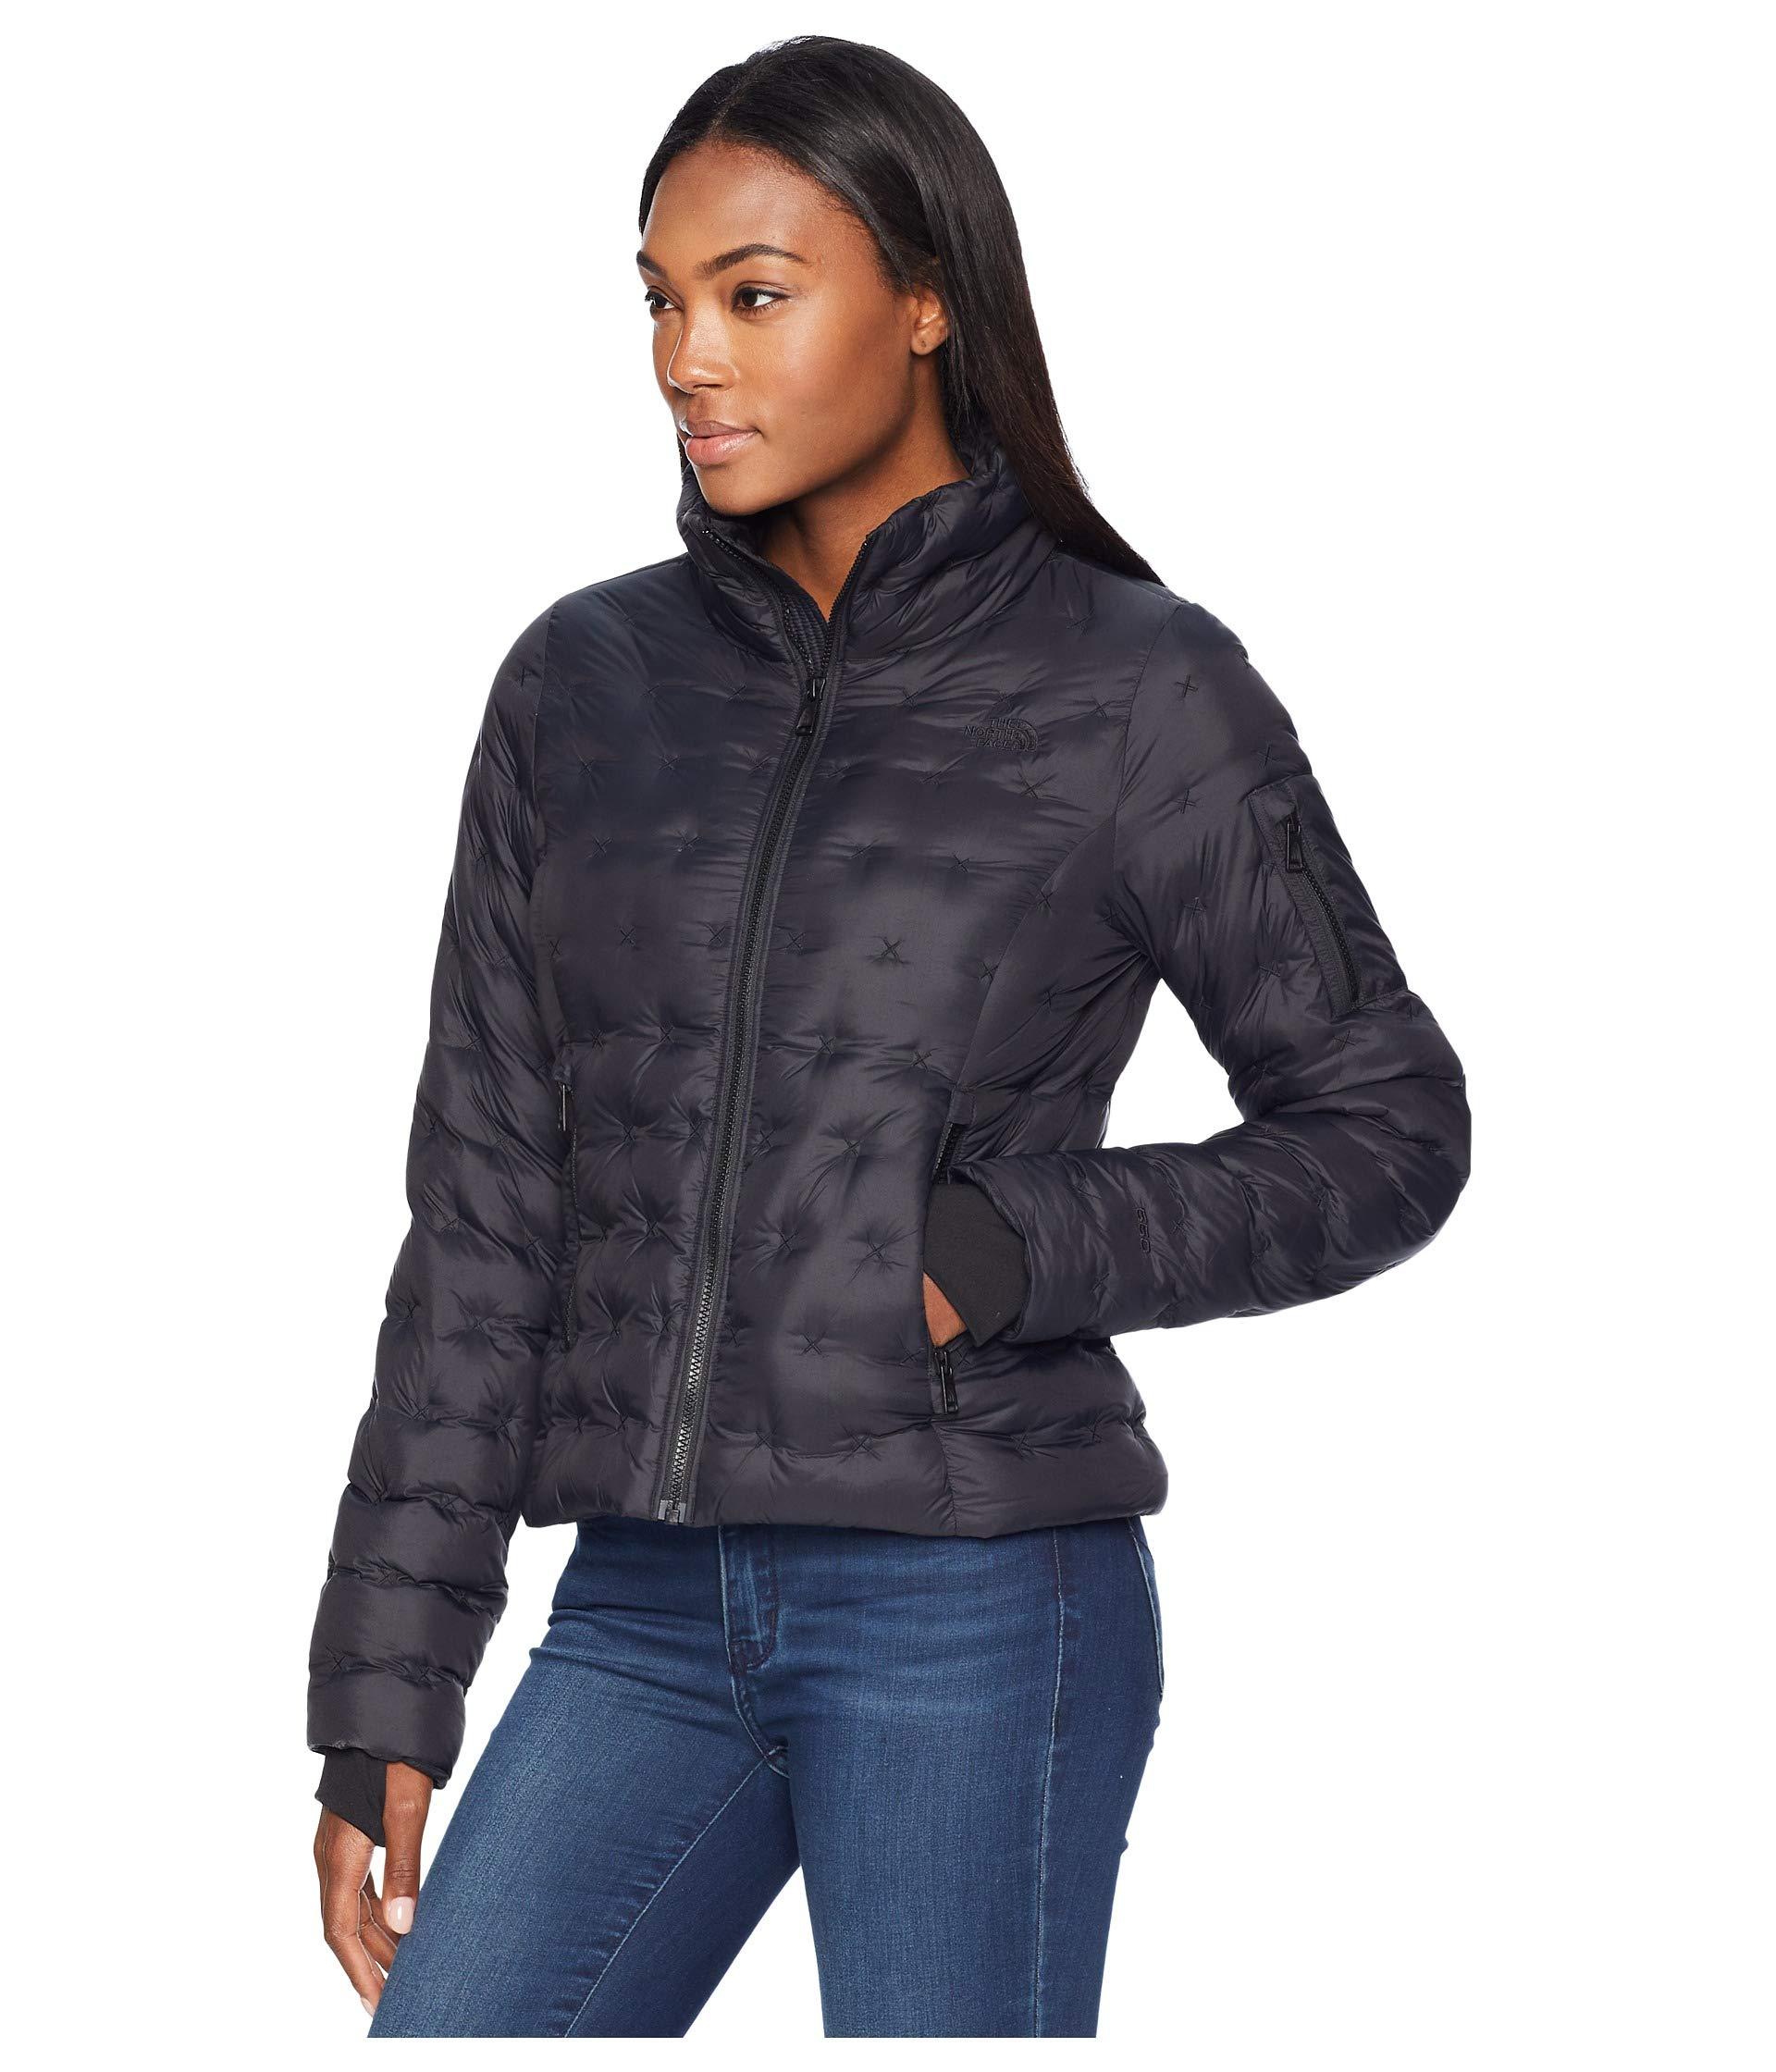 The North Face Goose Holladown Crop Jacket in Black - Lyst